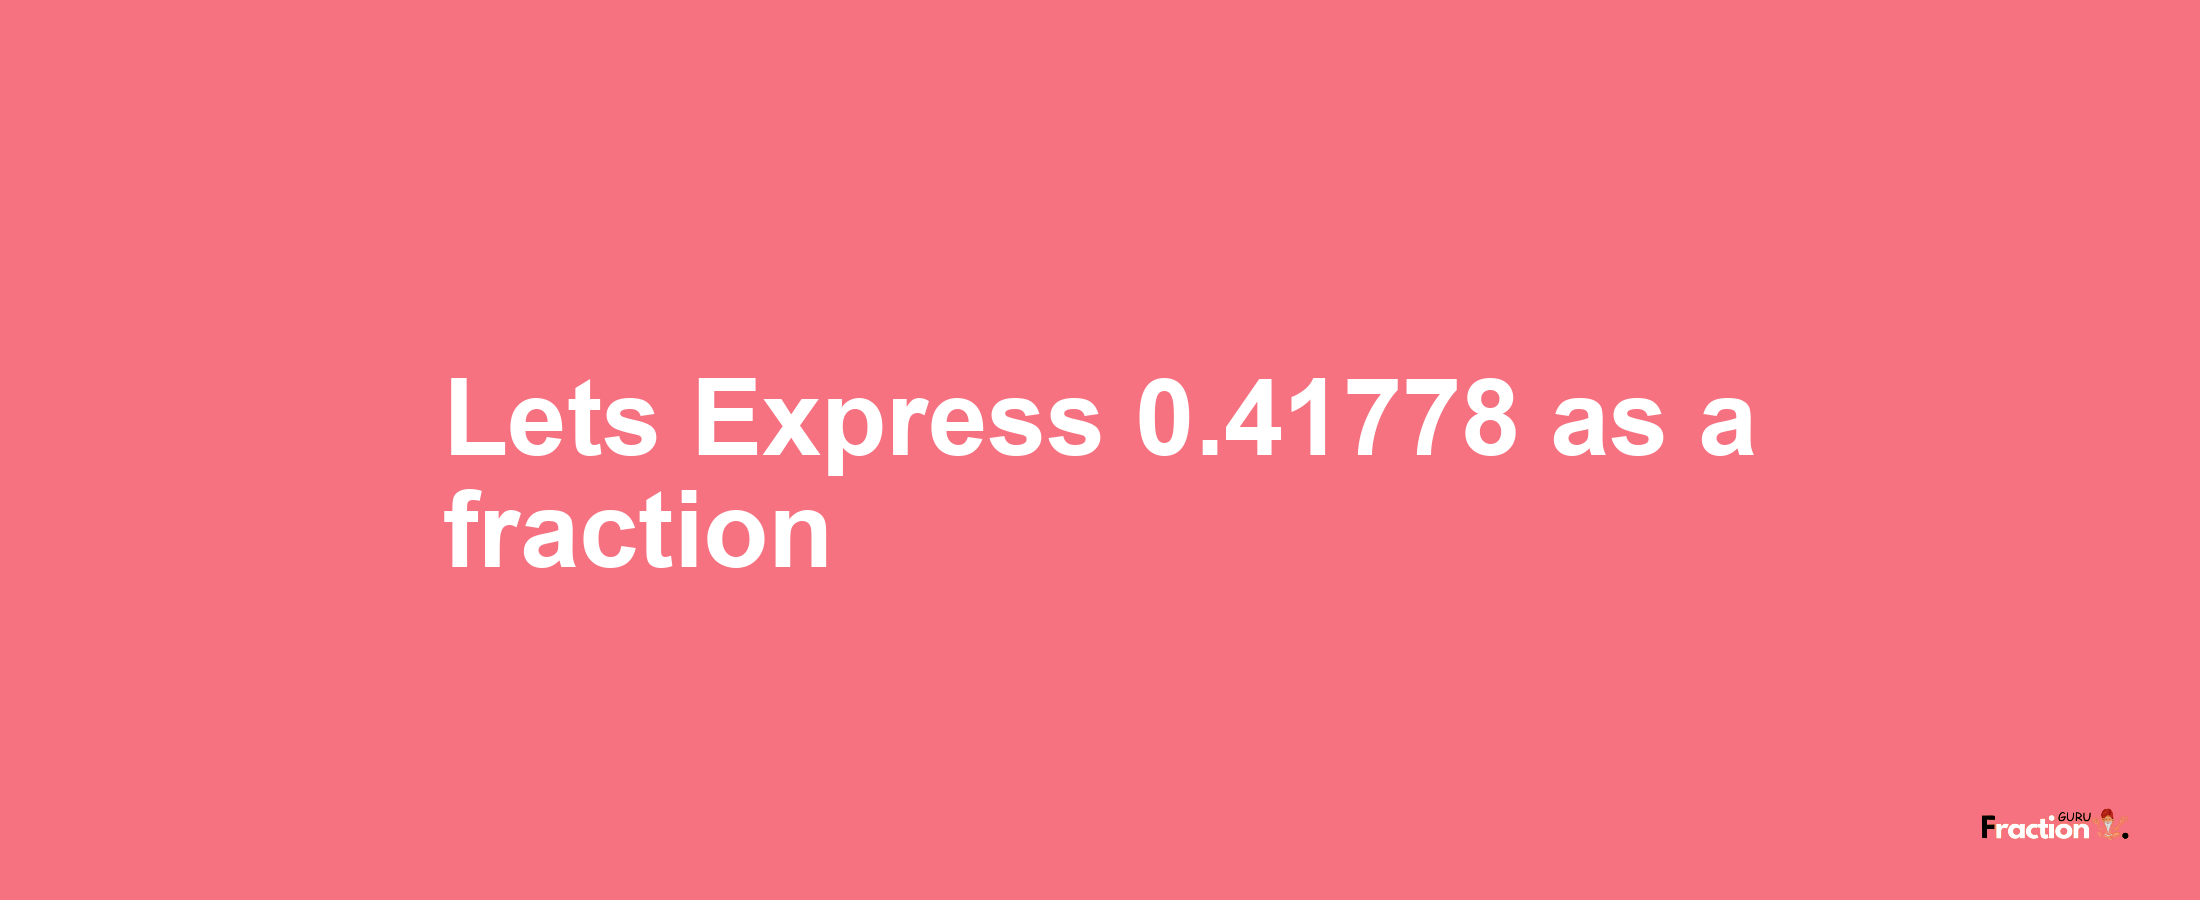 Lets Express 0.41778 as afraction